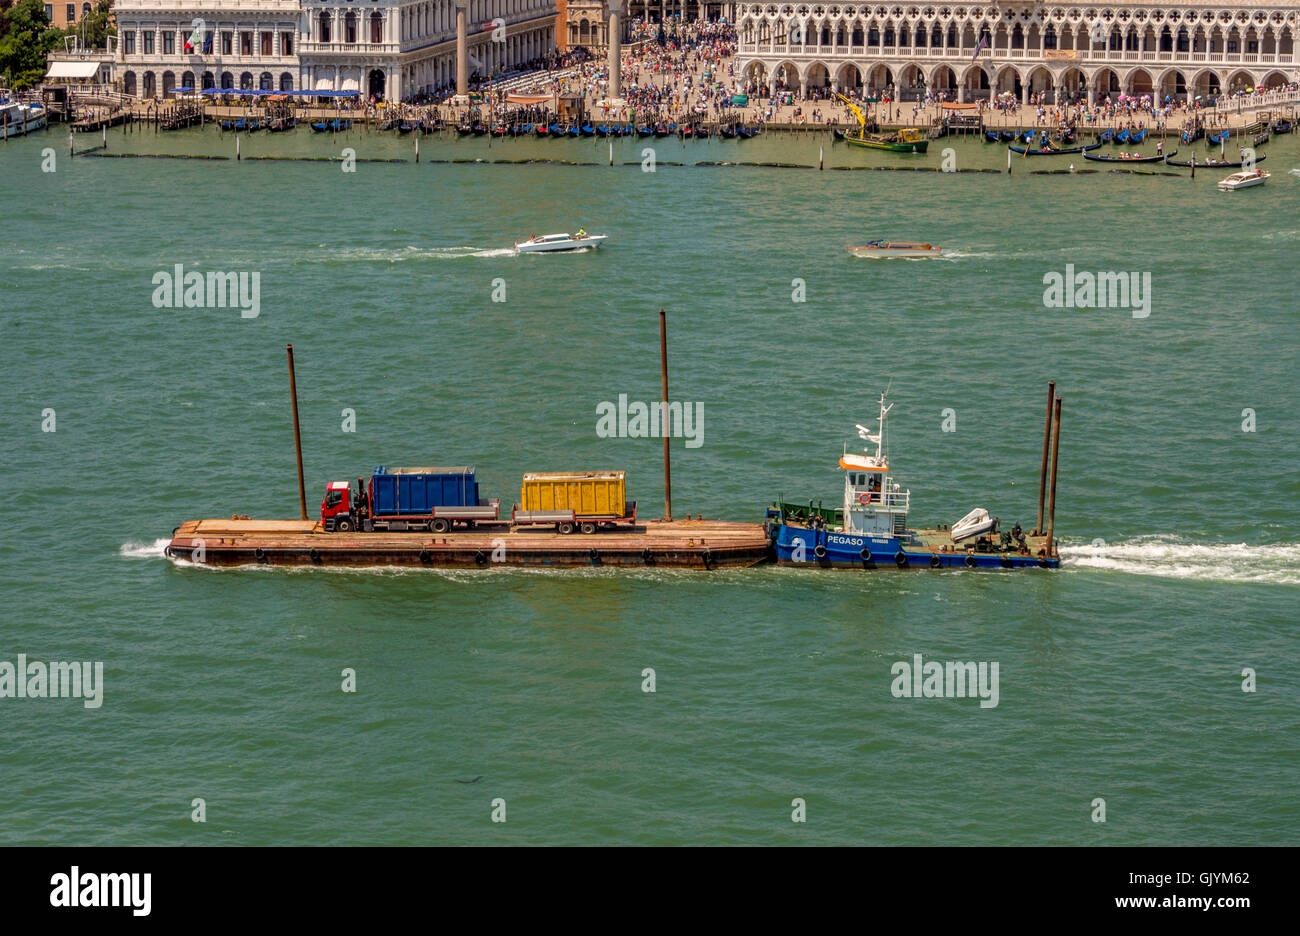 Lorry and trailer on a barge being pushed by a tugboat on St Mark's basin, with Doges Palace in the distance. Venice, Italy. Stock Photo